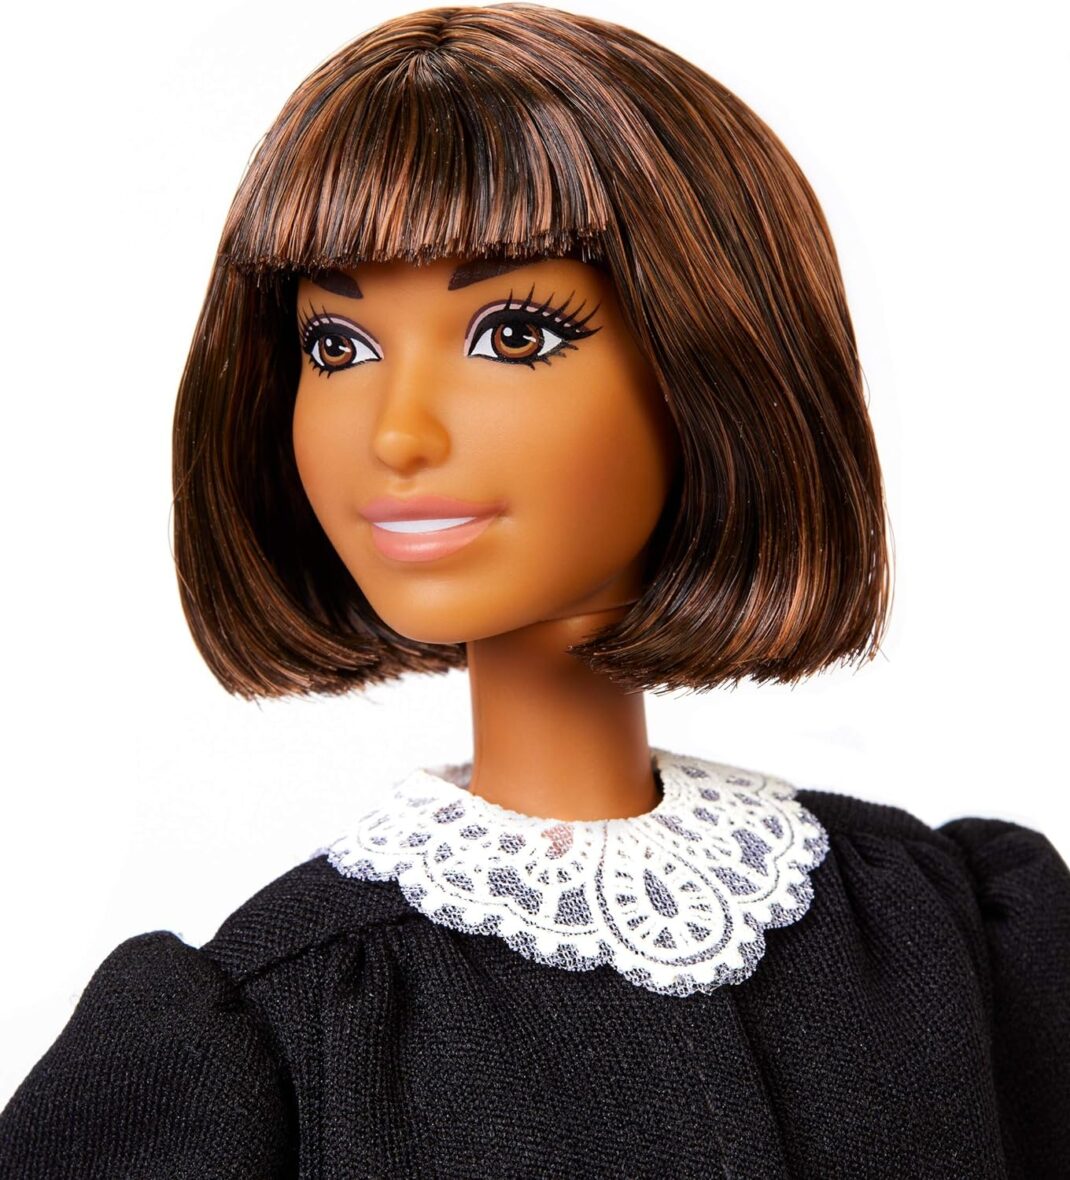 Barbie Judge Doll, Short Bob Brunette, Wearing Black Robe with Gavel and Block, for 3 to 7 Year Olds